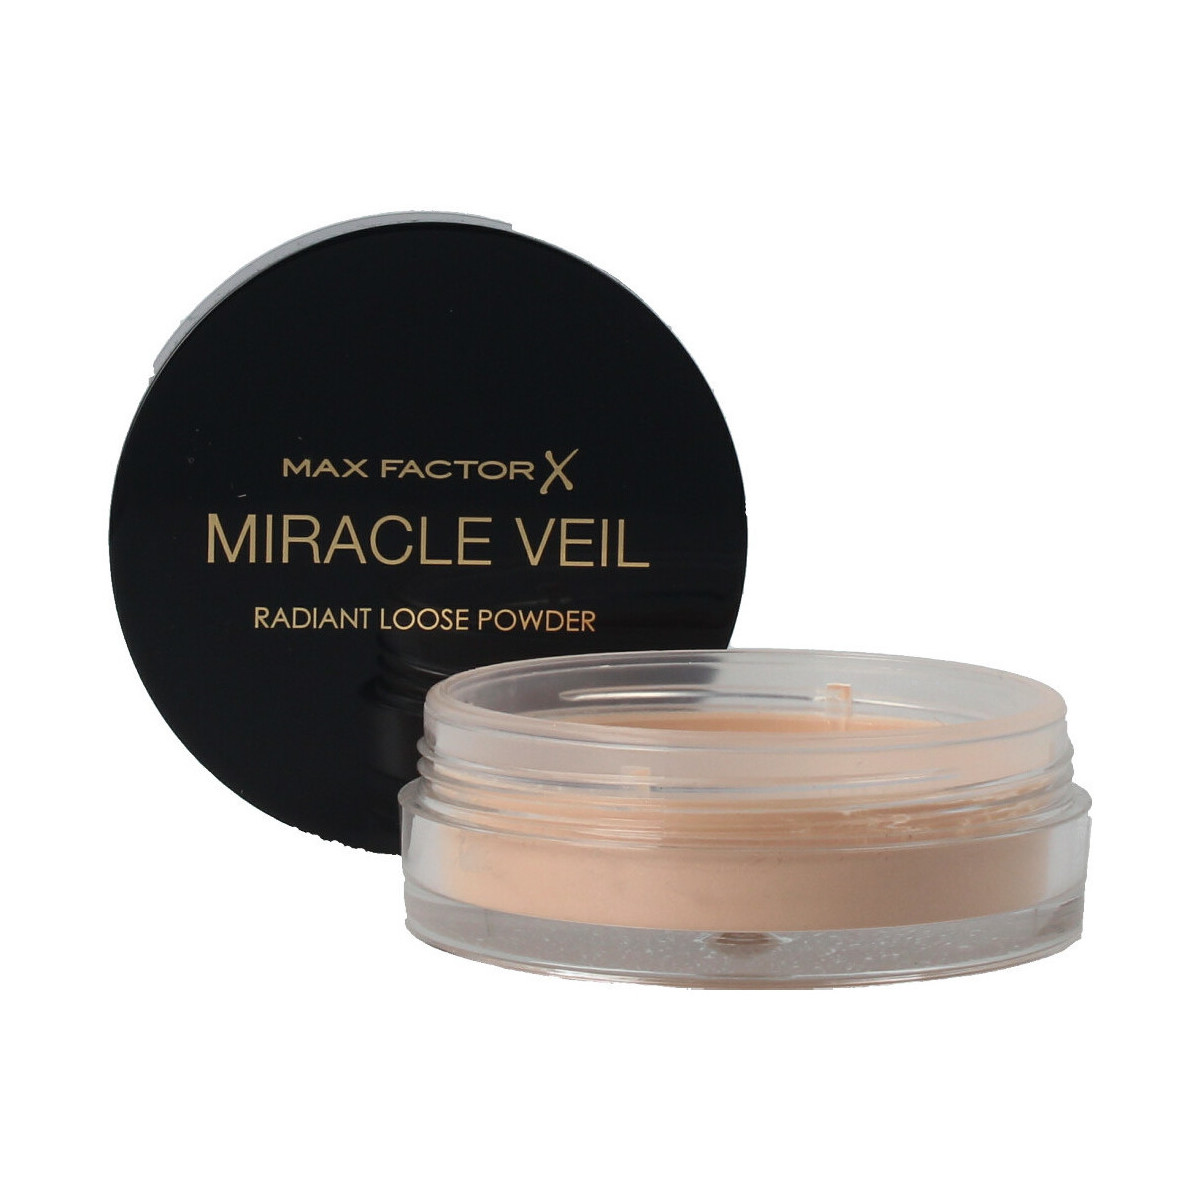 Bellezza Donna Blush & cipria Max Factor Miracle Veil Radiant Loose Powder 4 Gr 